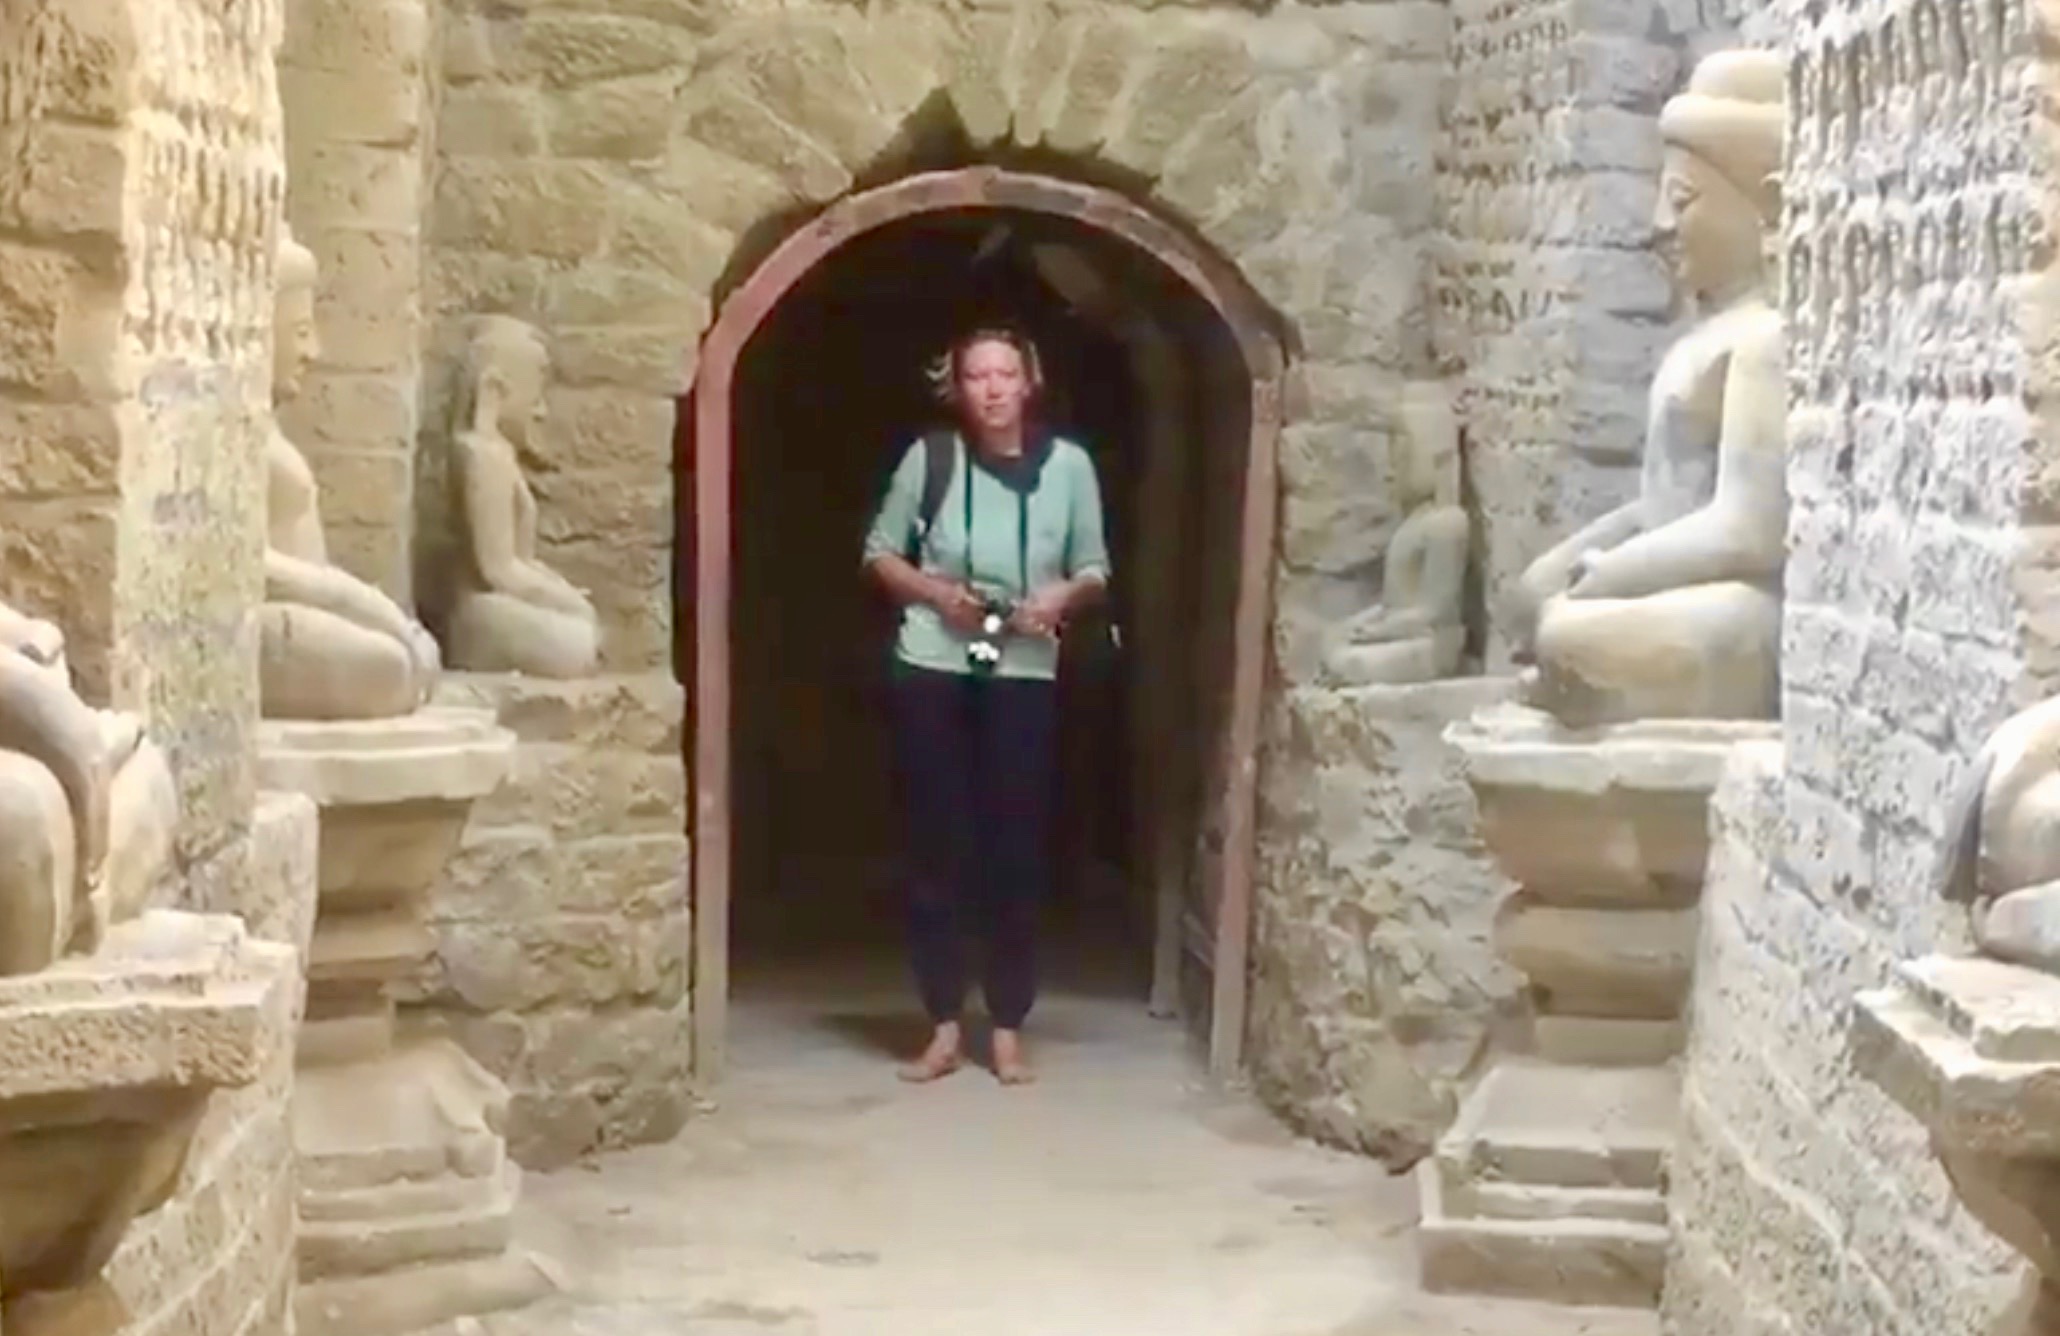 The backpackers were visiting the temples of Mrauk U when they ran into the conflict. (Christopher Caddy / screenshot)